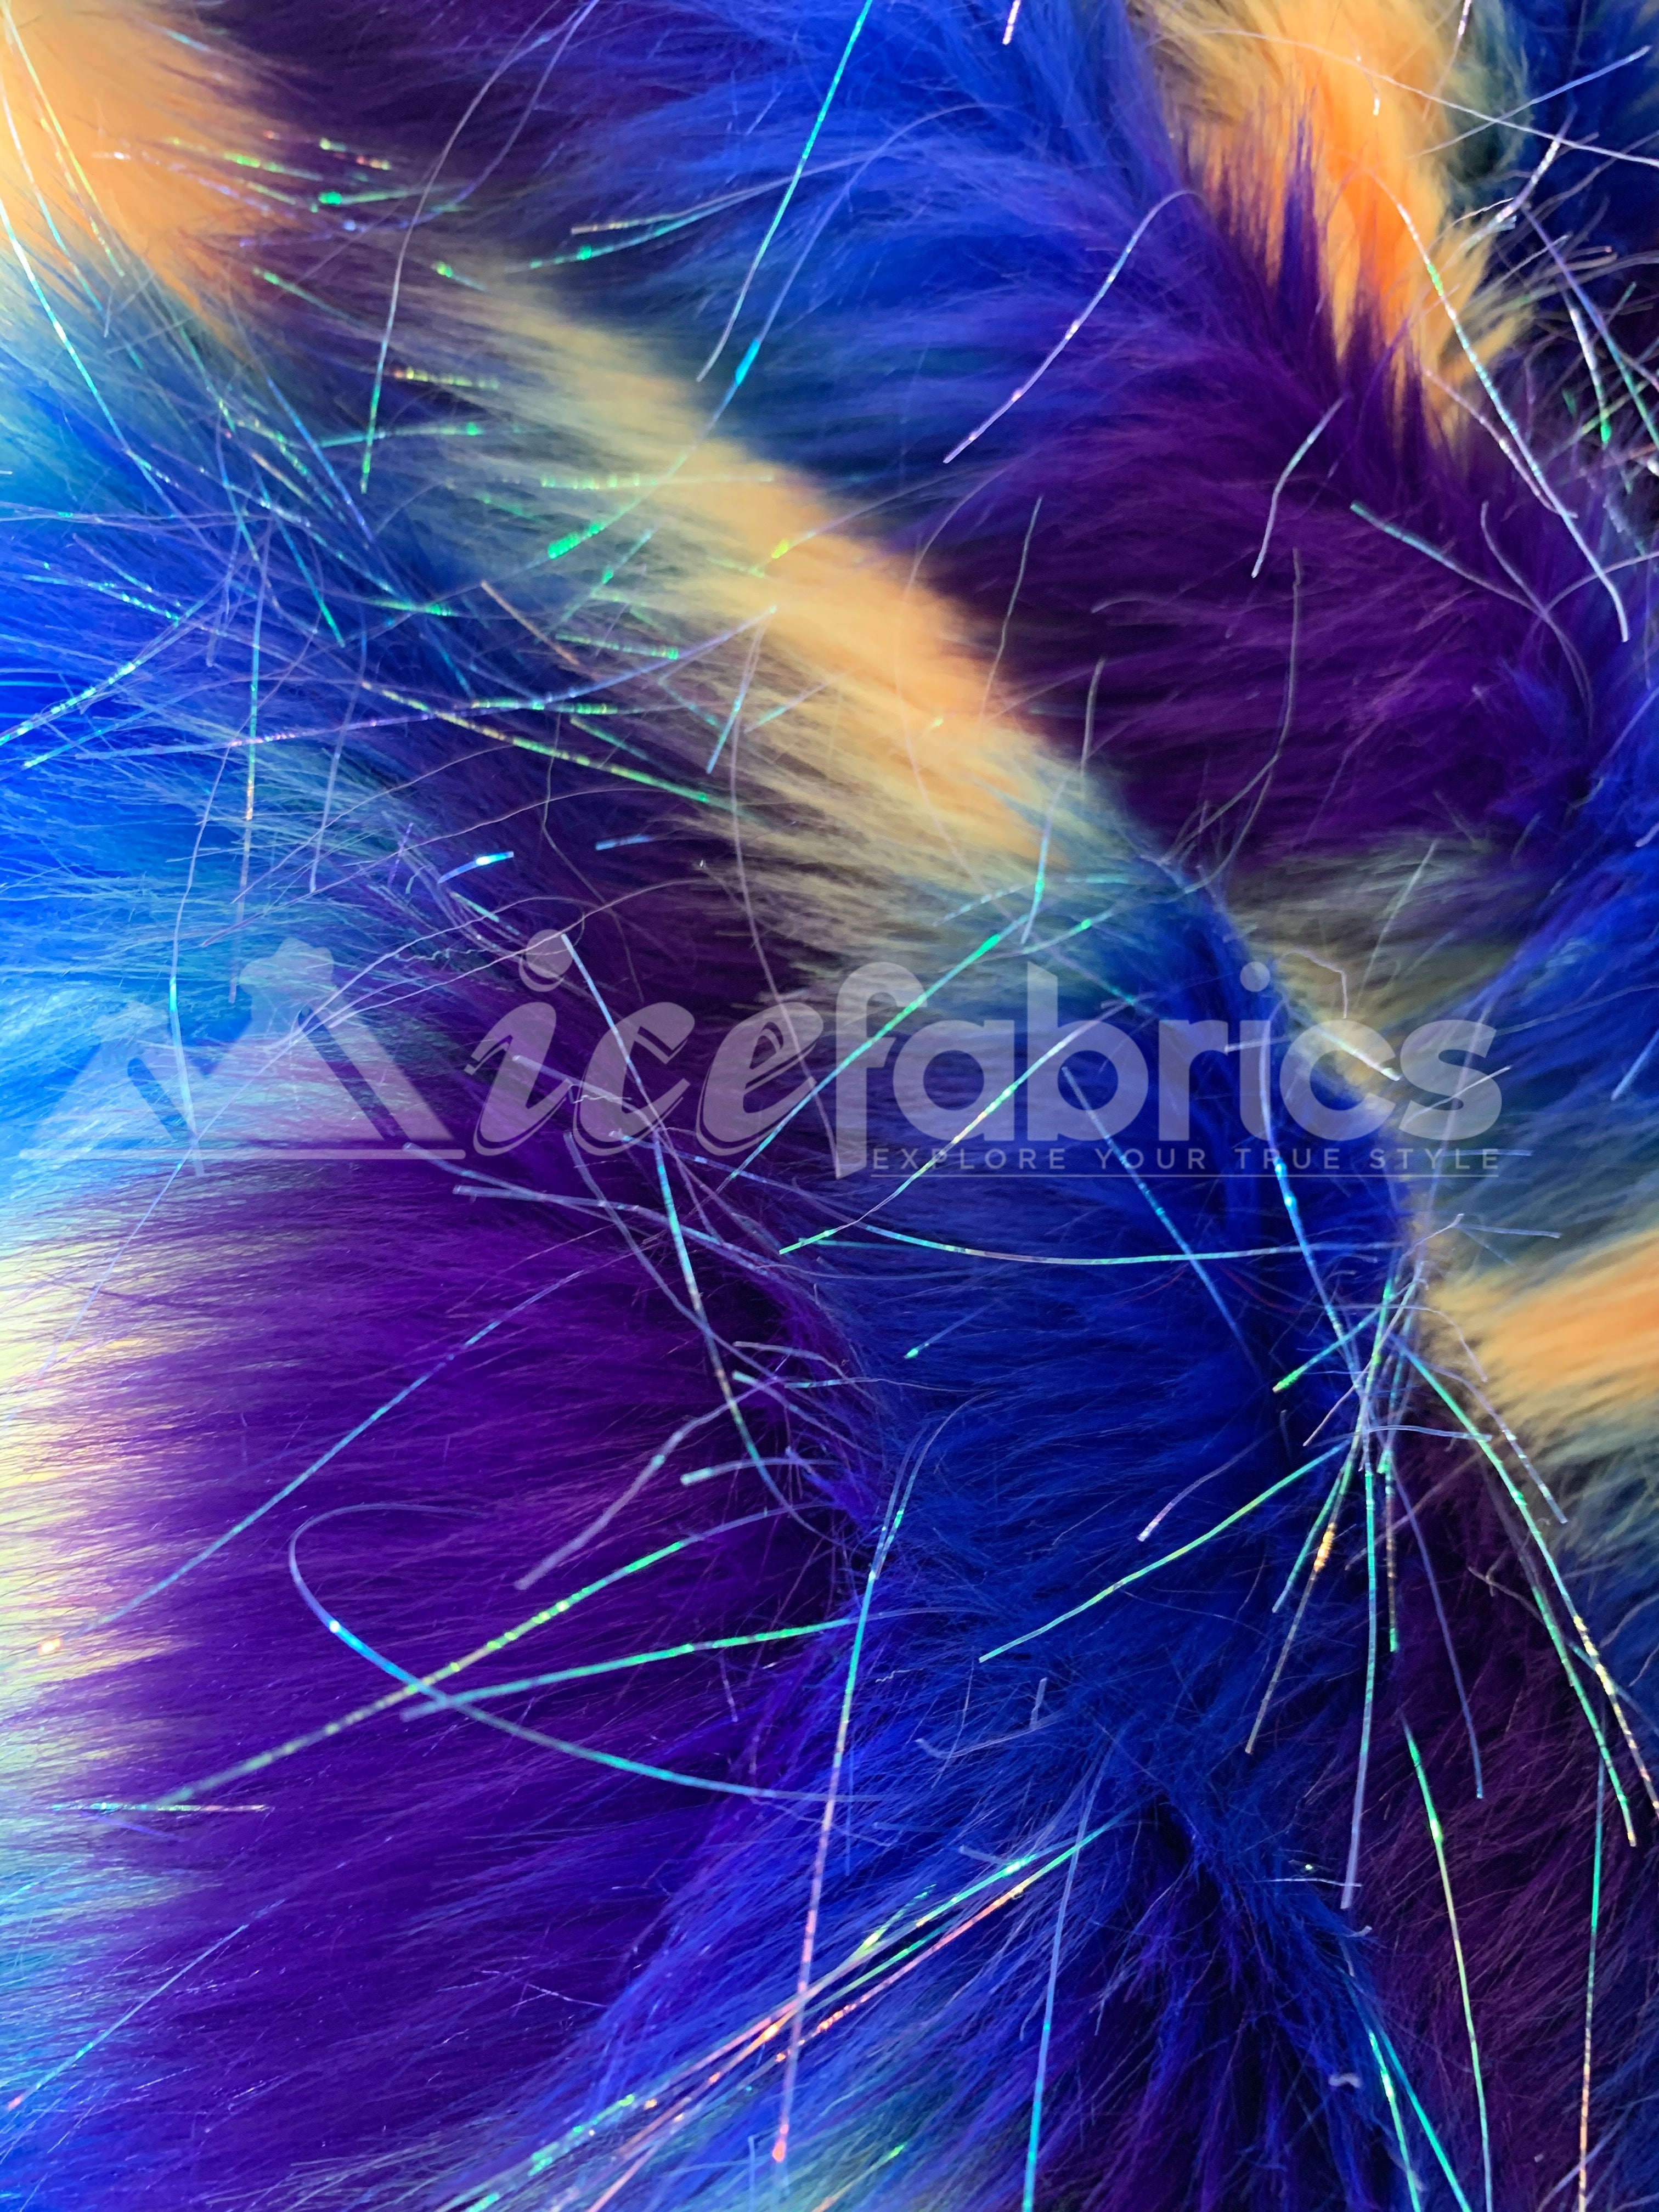 3 Tone Rainbow Tinsel 3.5" long Pile Blue, Yellow, and Purple Faux Fur Fabric By The YardICEFABRICICE FABRICSBy The Yard (60 inches Wide)3 Tone Rainbow Tinsel 3.5" long Pile Blue, Yellow, and Purple Faux Fur Fabric By The Yard ICEFABRIC